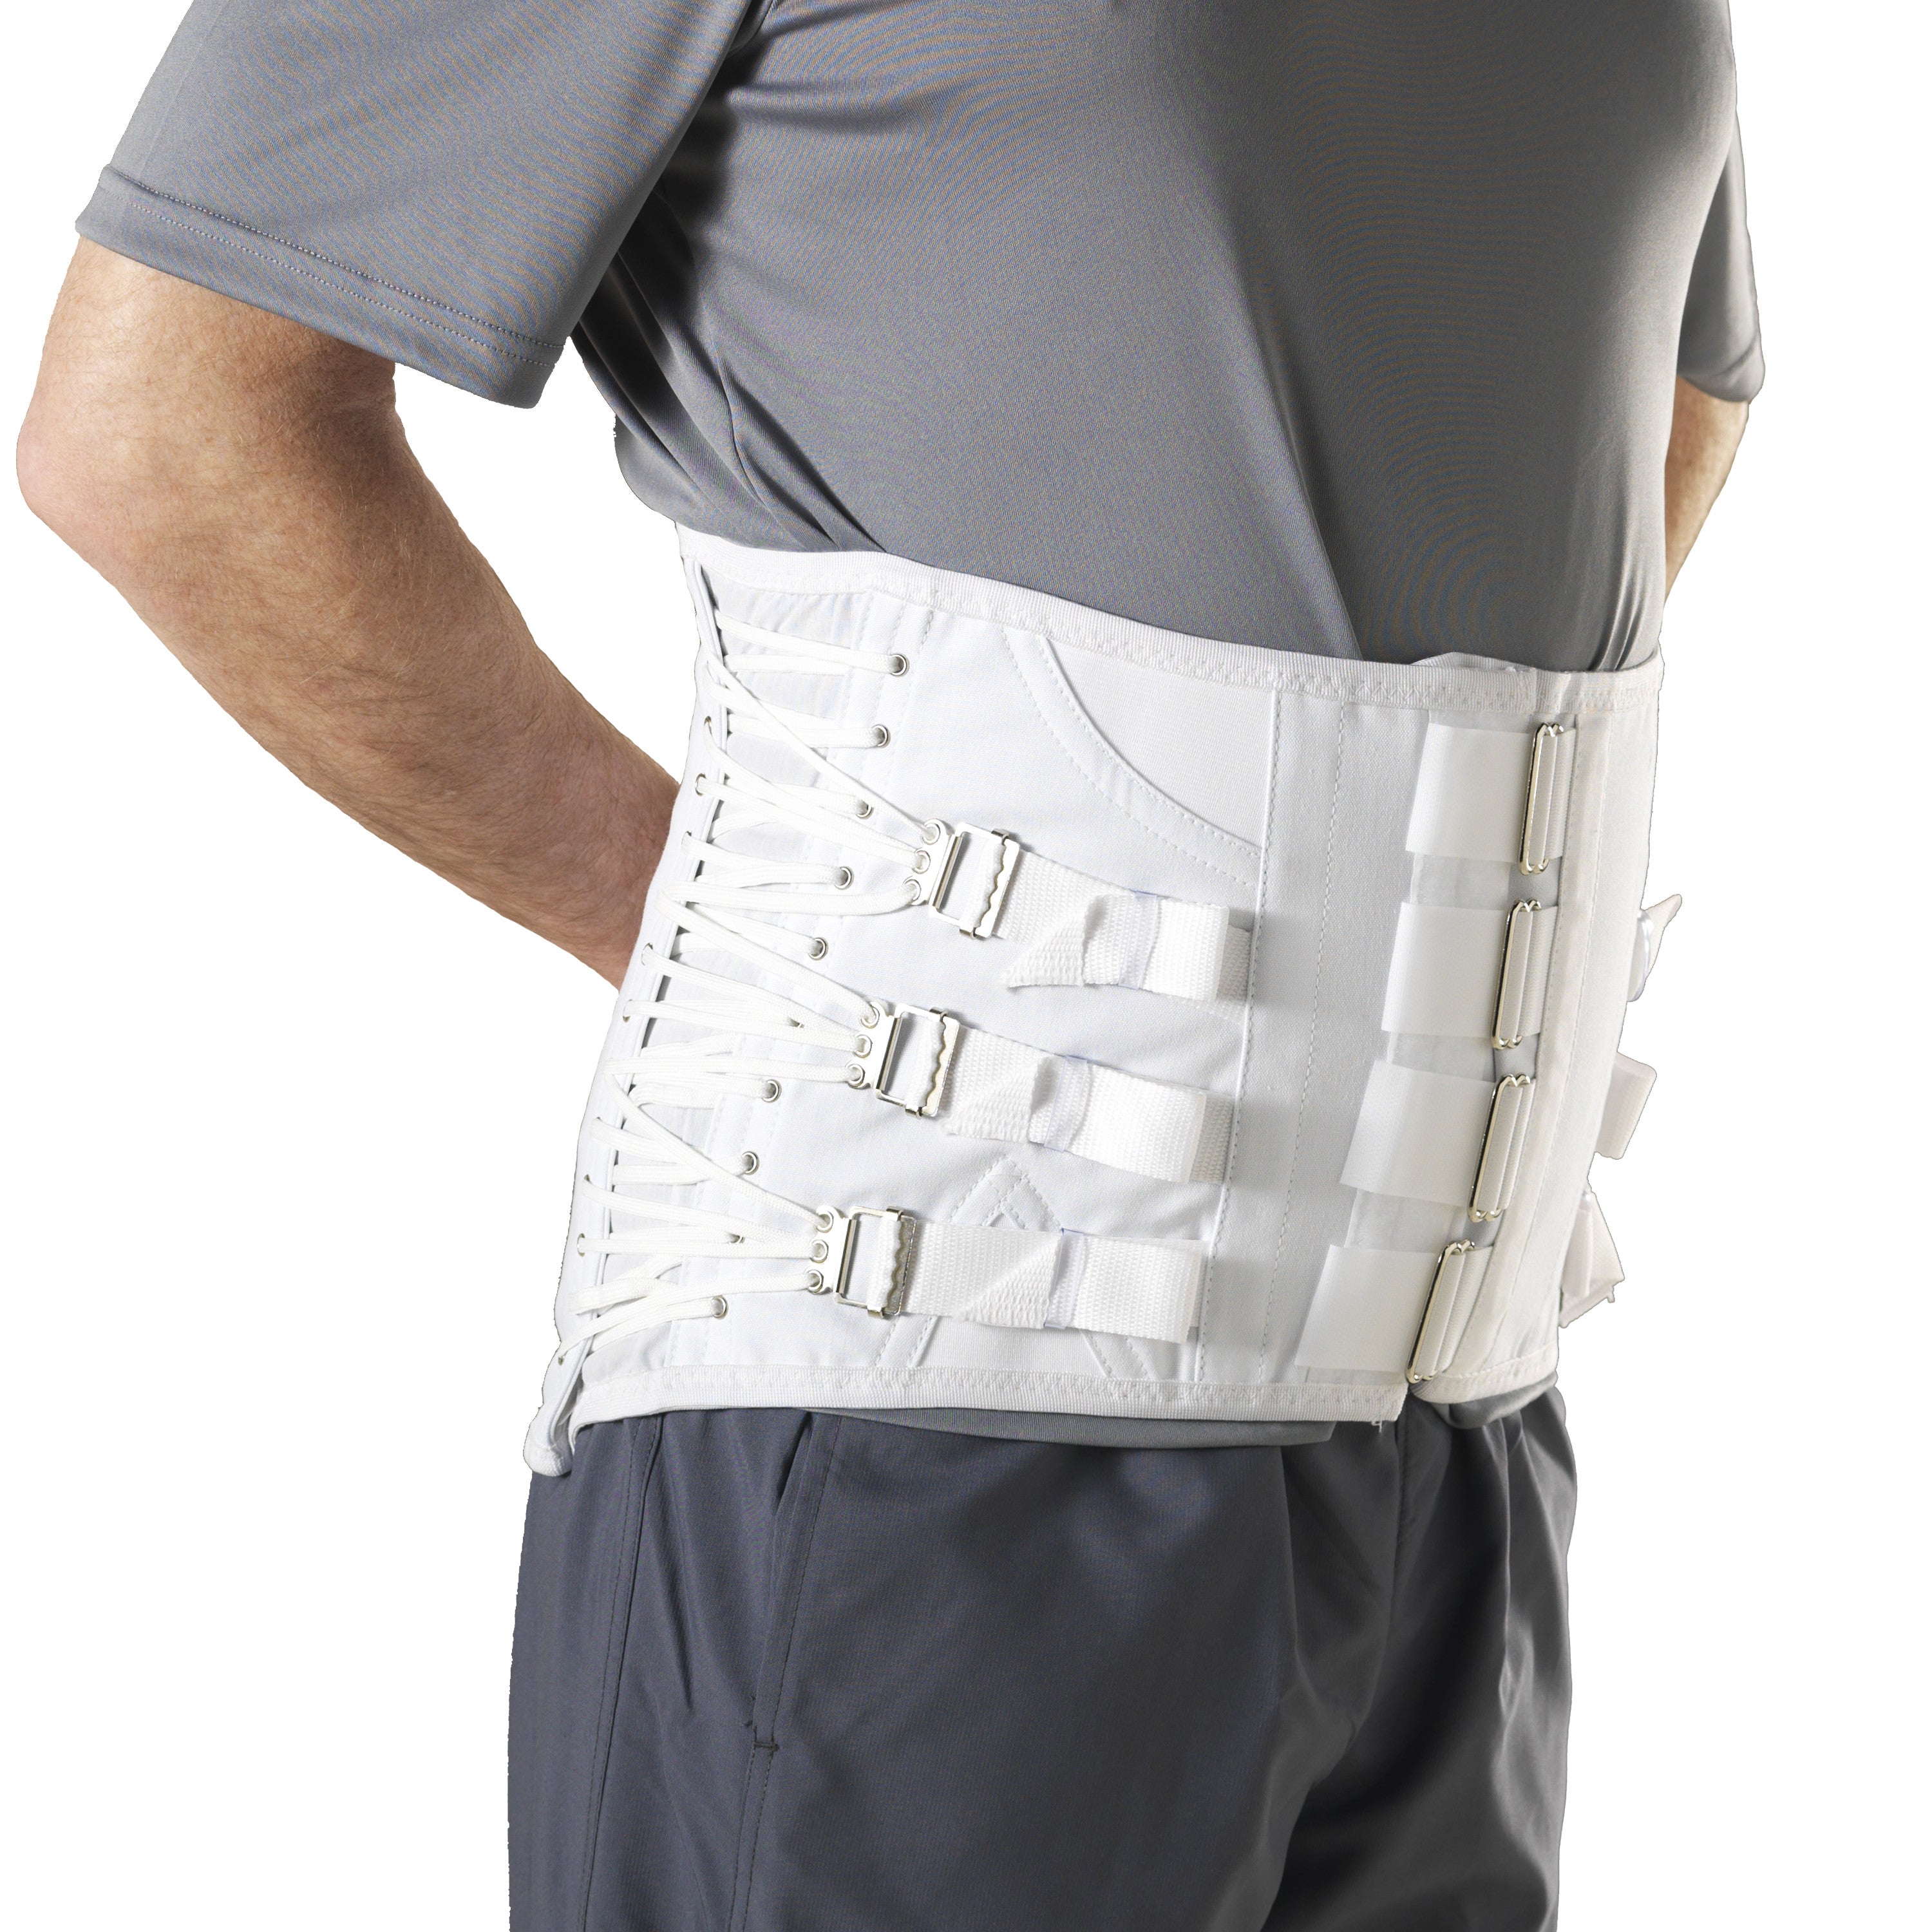 Lumbosacral Corset, Disc Alignment, Spine Posture, Adjustable Front, S -  Home Medical Supply